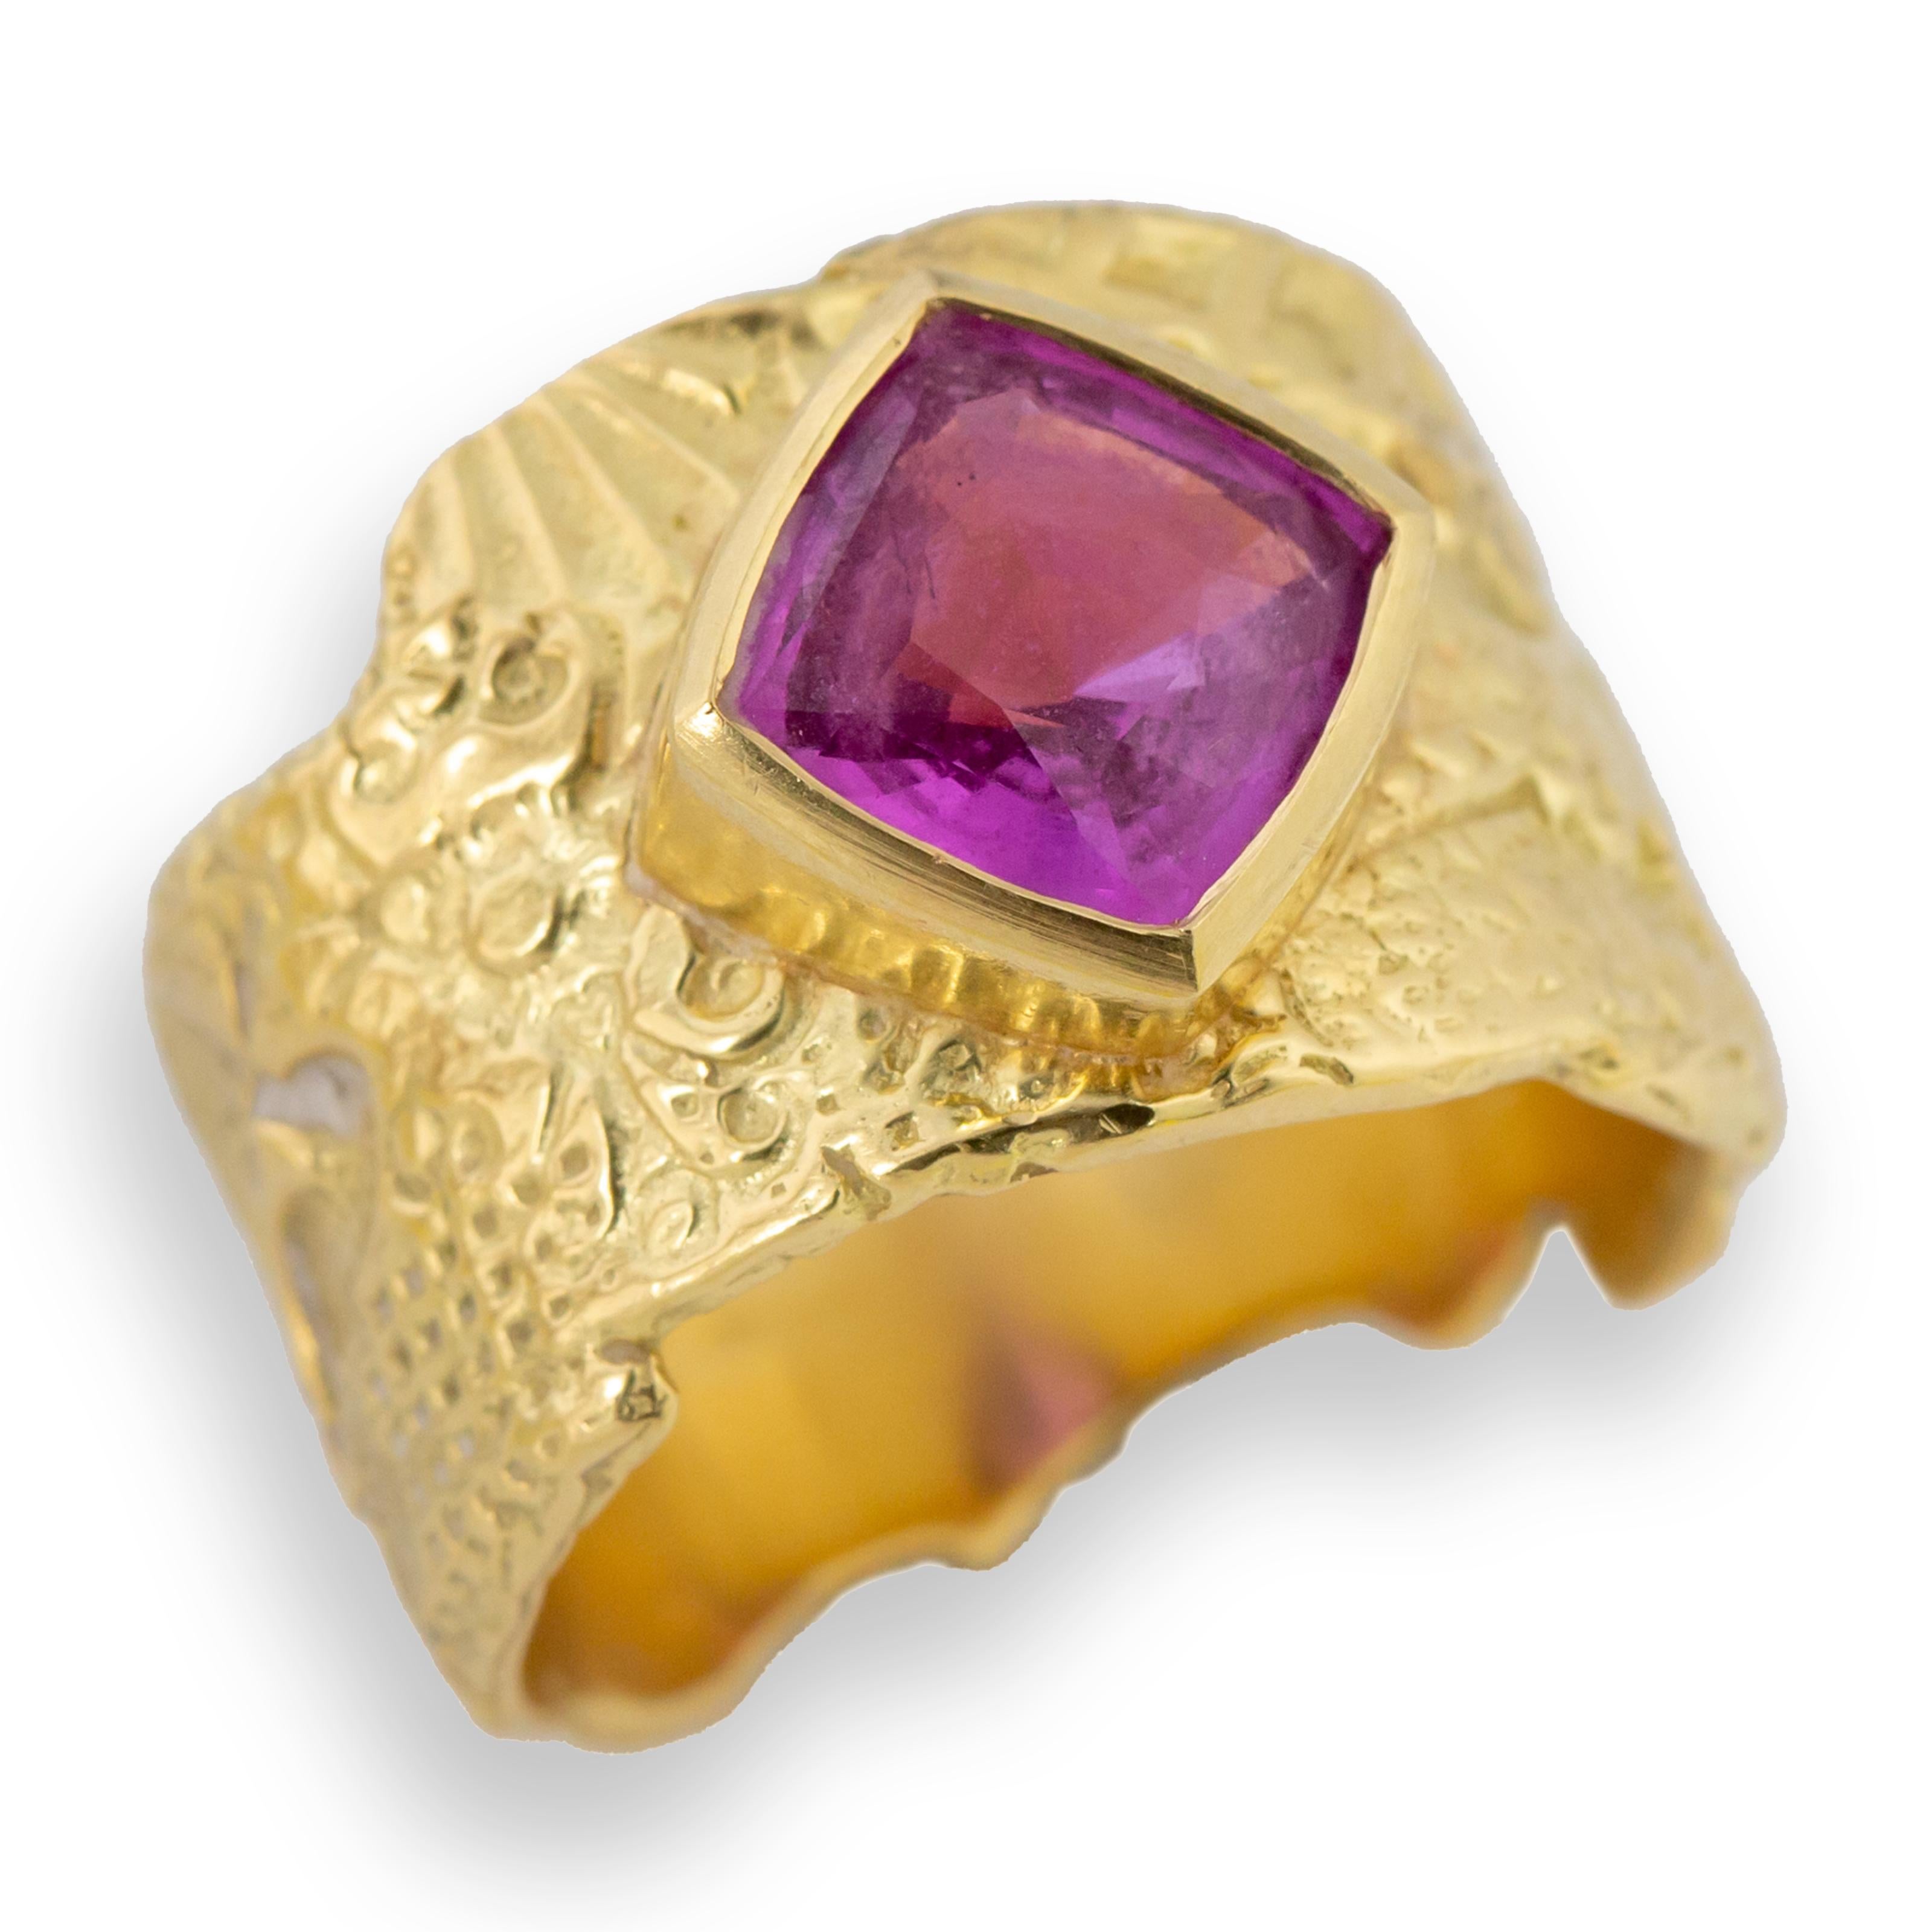 Cushion Cut Faceted Pink Sapphire set in 18kt Gold Georgette Band

Pink Sapphire: 3.06ct; 8.4mm x 8.4mm